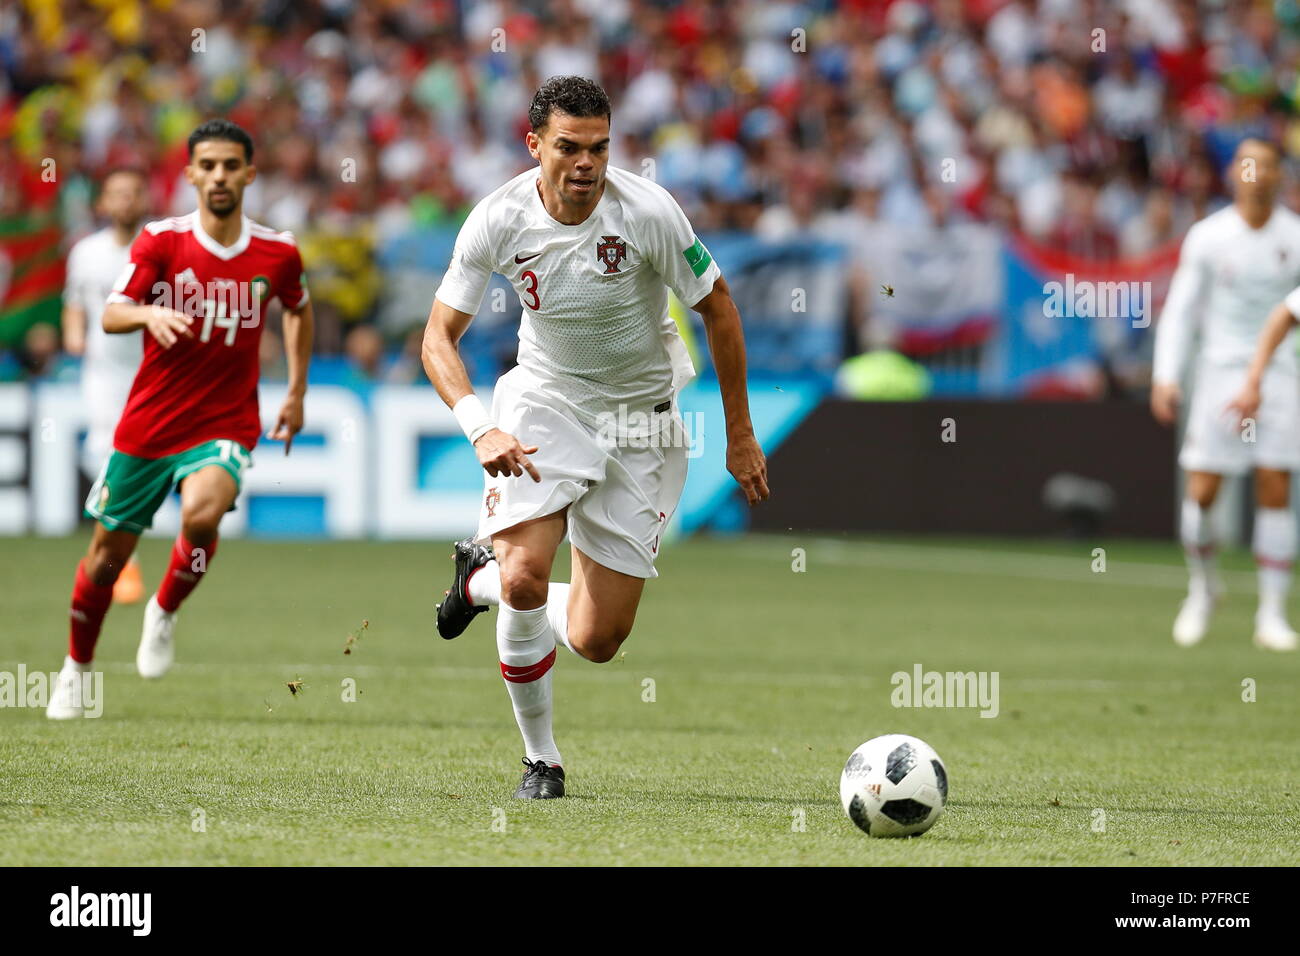 Moscow, Russia. 20th June, 2018. Pepe (POR) Football/Soccer : FIFA World Cup Russia 2018 match between Portugal 1-0 Morocco at the Luzhniki Stadium in Moscow, Russia . Credit: Mutsu KAWAMORI/AFLO/Alamy Live News Stock Photo